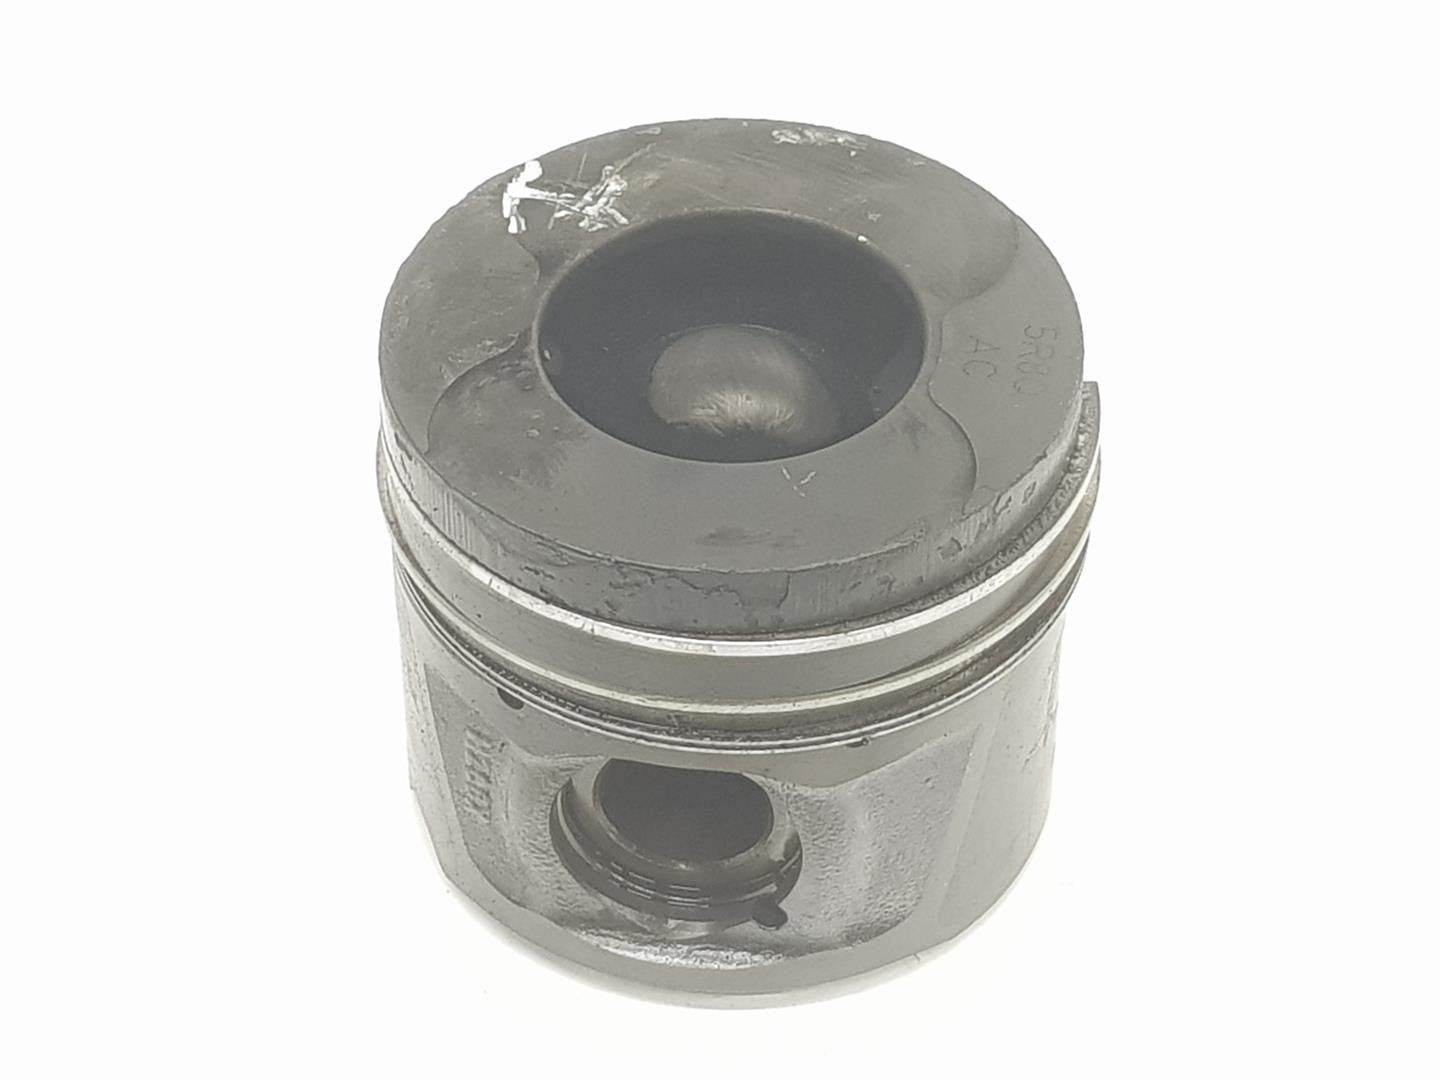 LAND ROVER Discovery 3 generation (2004-2009) Stūmoklis PISTON276DT, 276DT, 1111AA 24238330